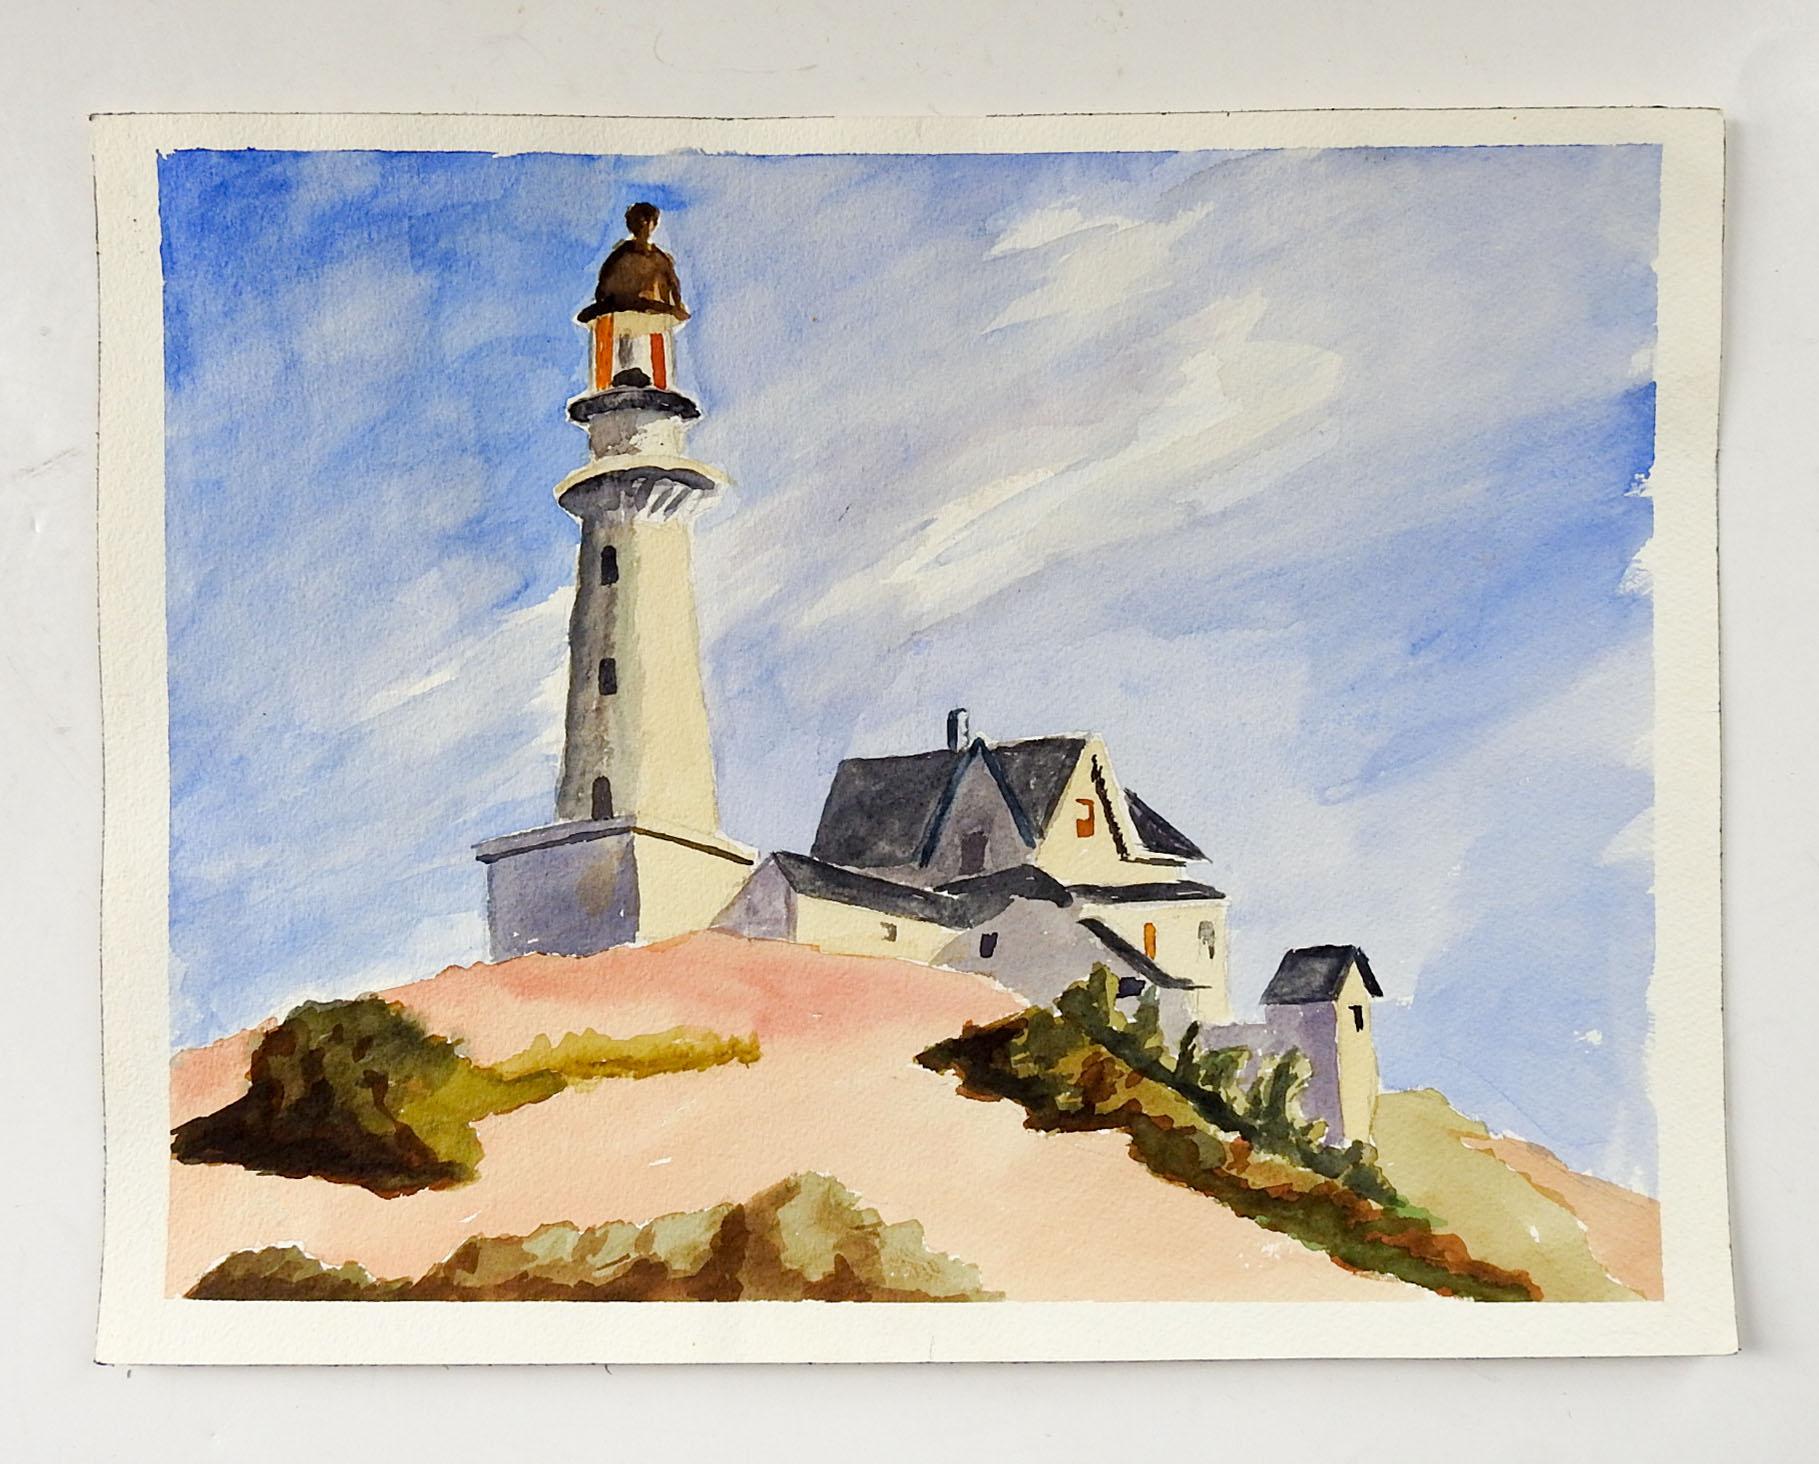 Vintage watercolor on paper painting of a lighthouse high on a hill or cliff. Unsigned. Unframed.